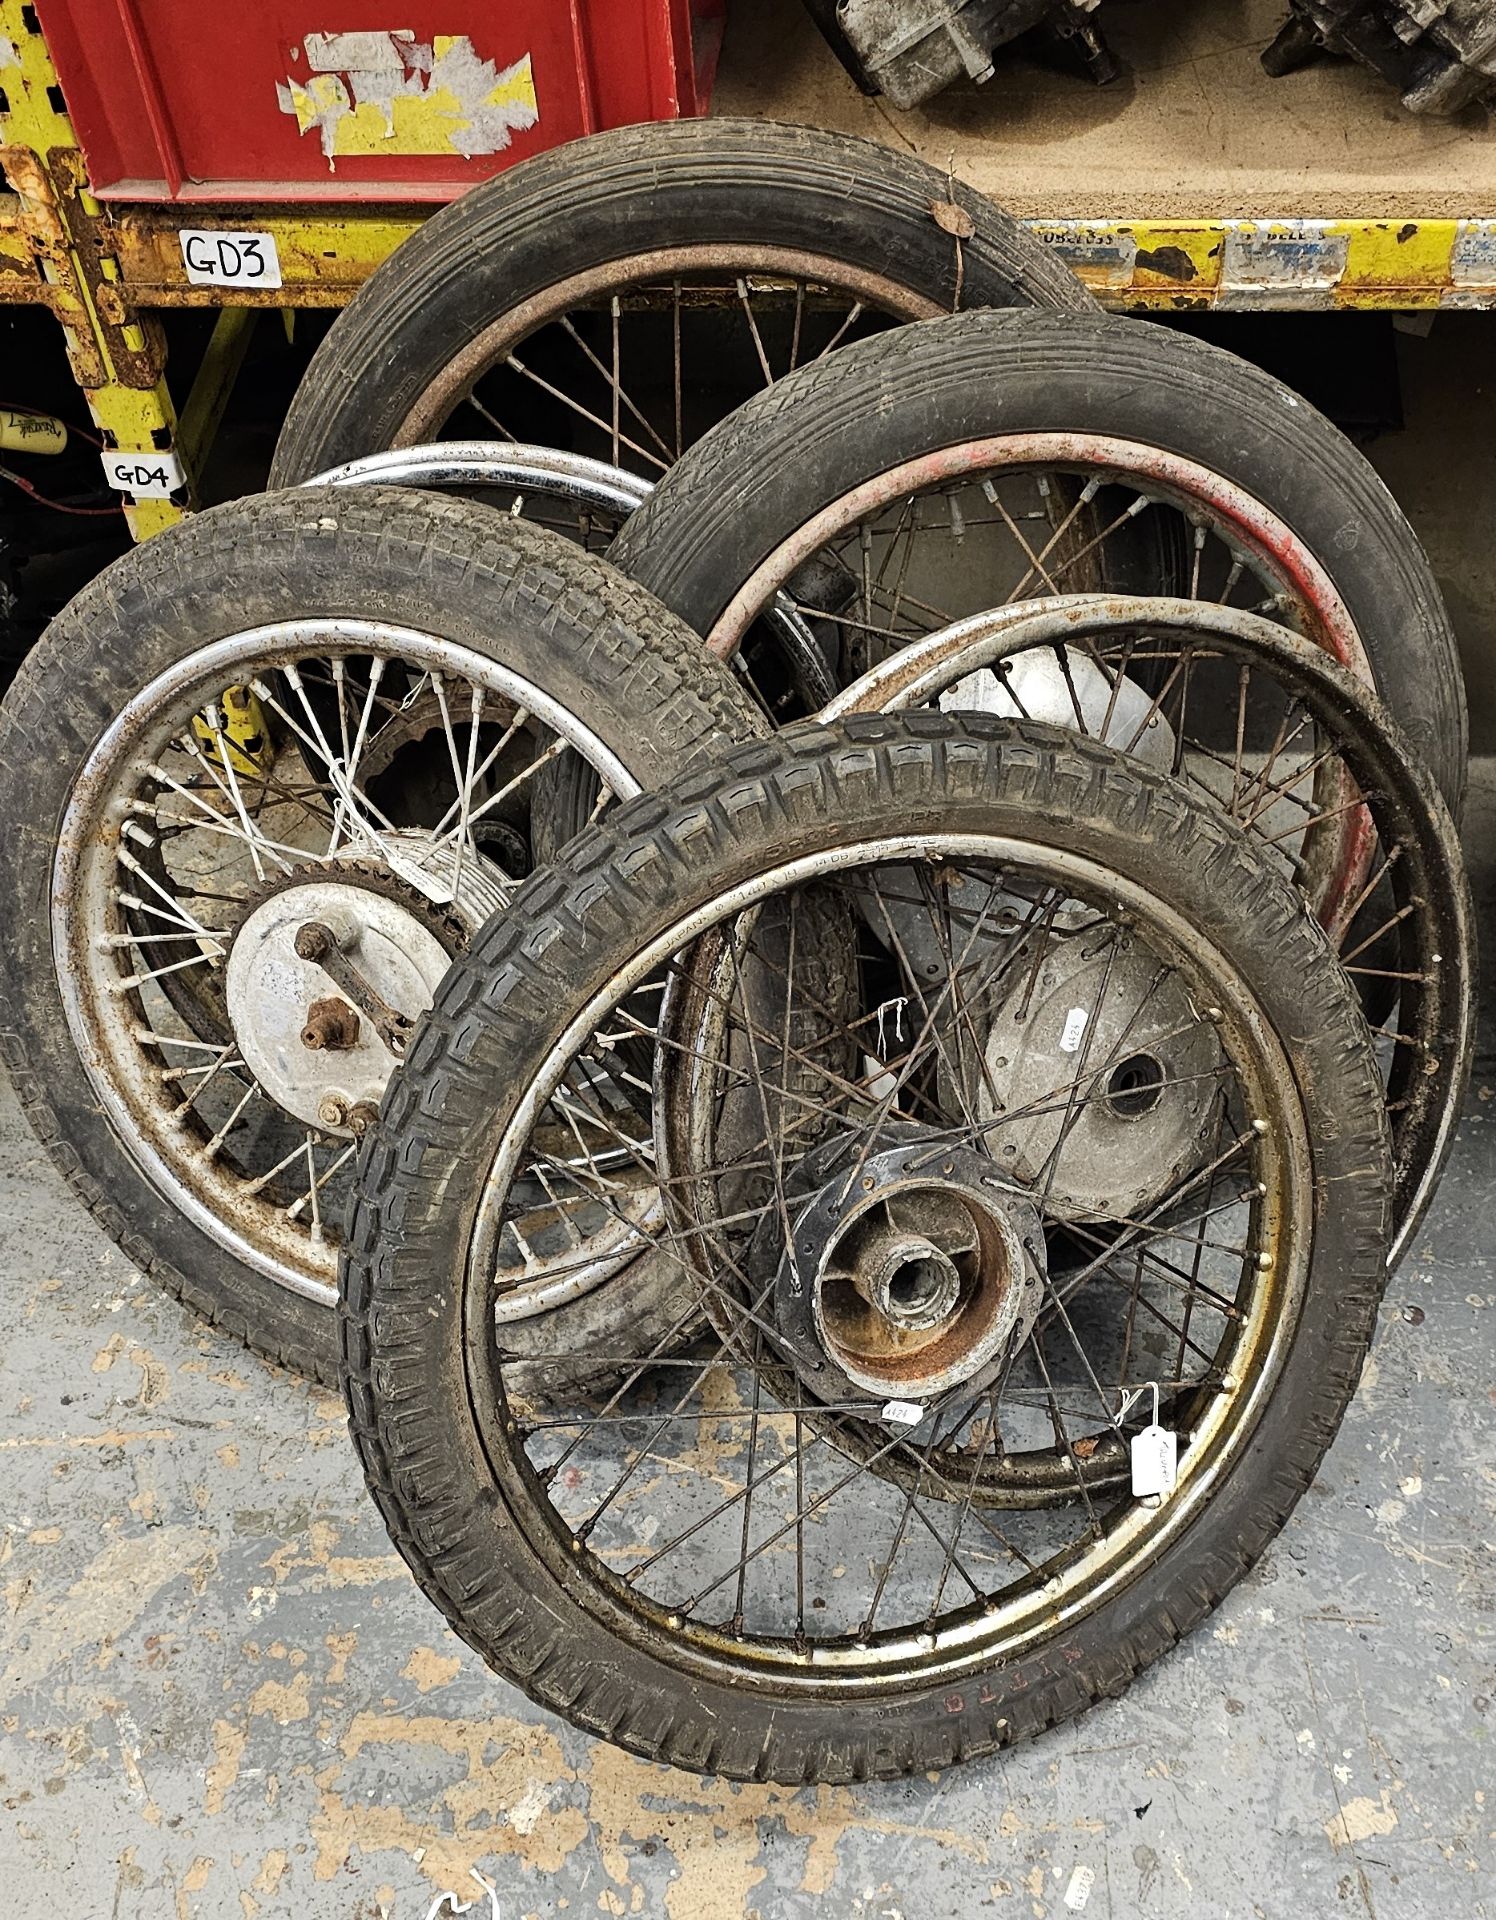 A Triumph Tiger Cub front wheel and 5 other Triumph wheels